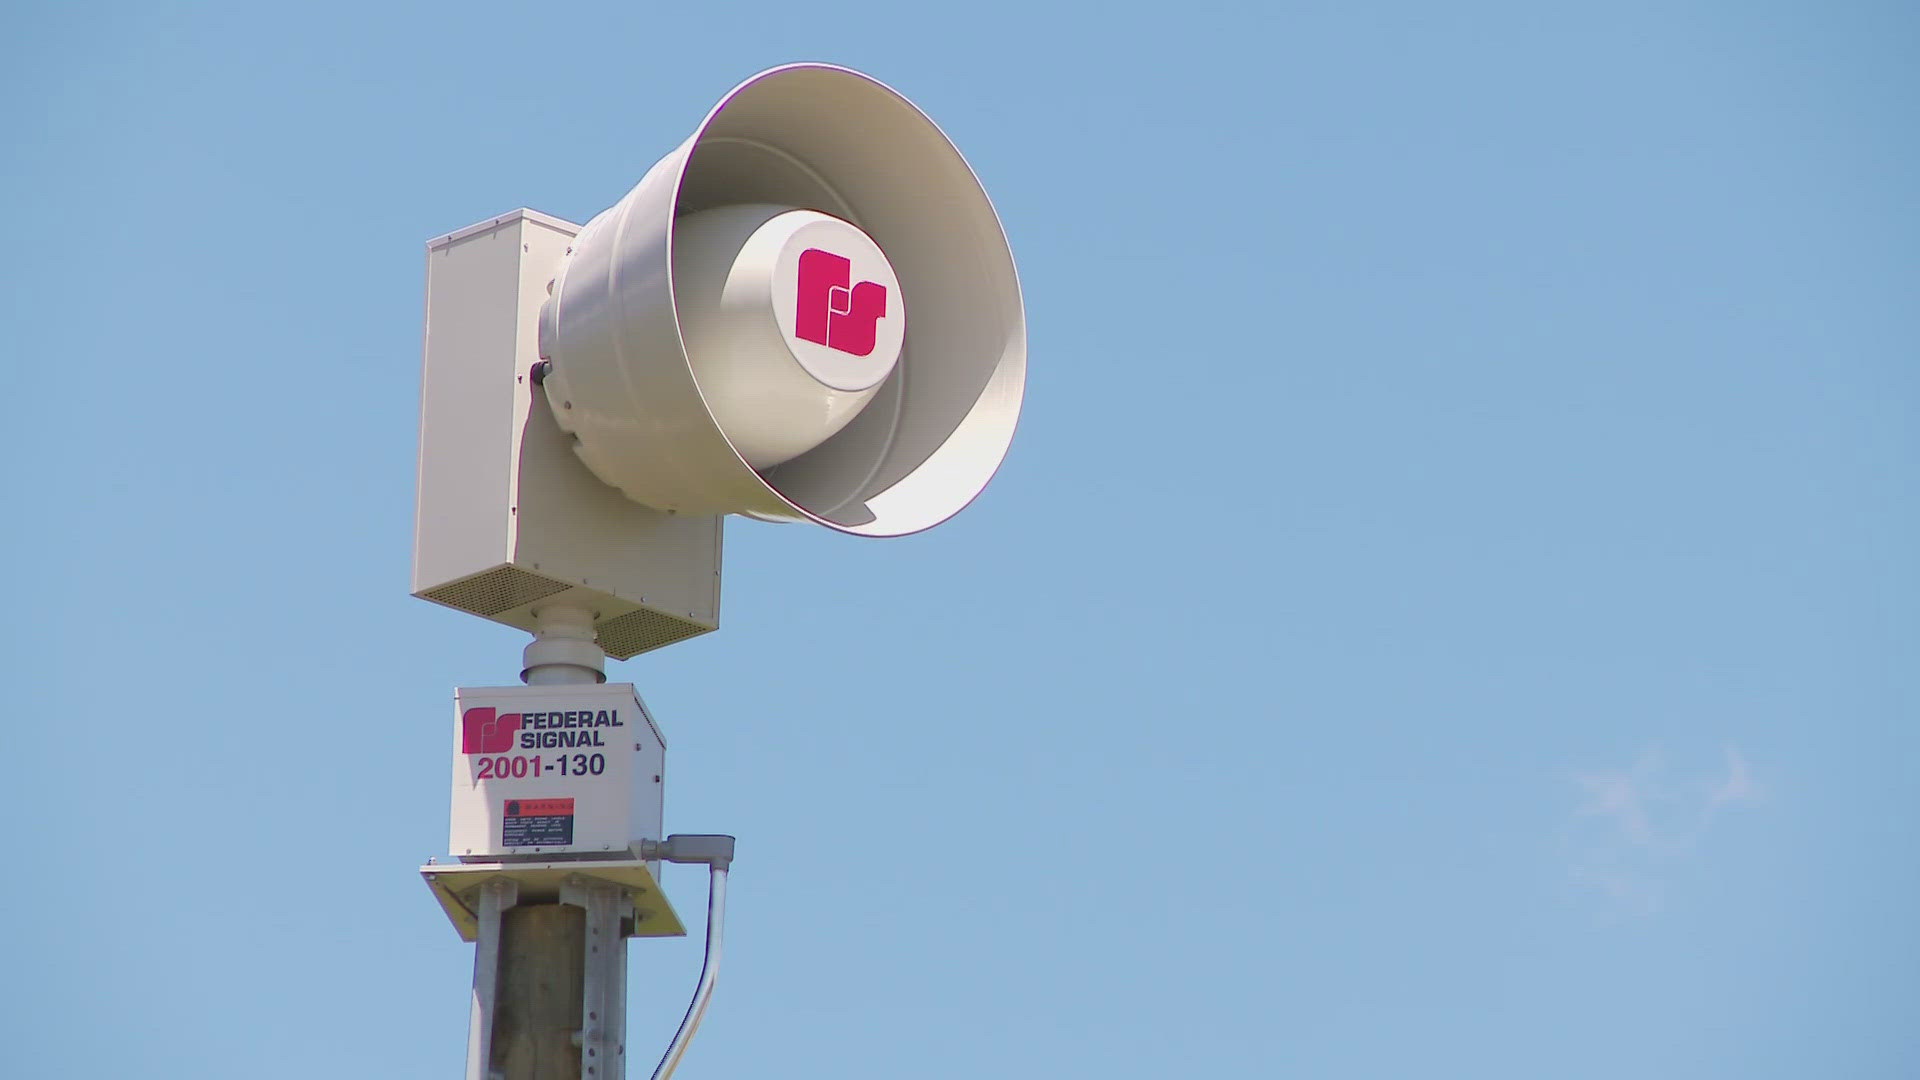 After several tornados passed through southern Indiana this year, emergency management is making it a goal to fund and install sirens in areas without them.